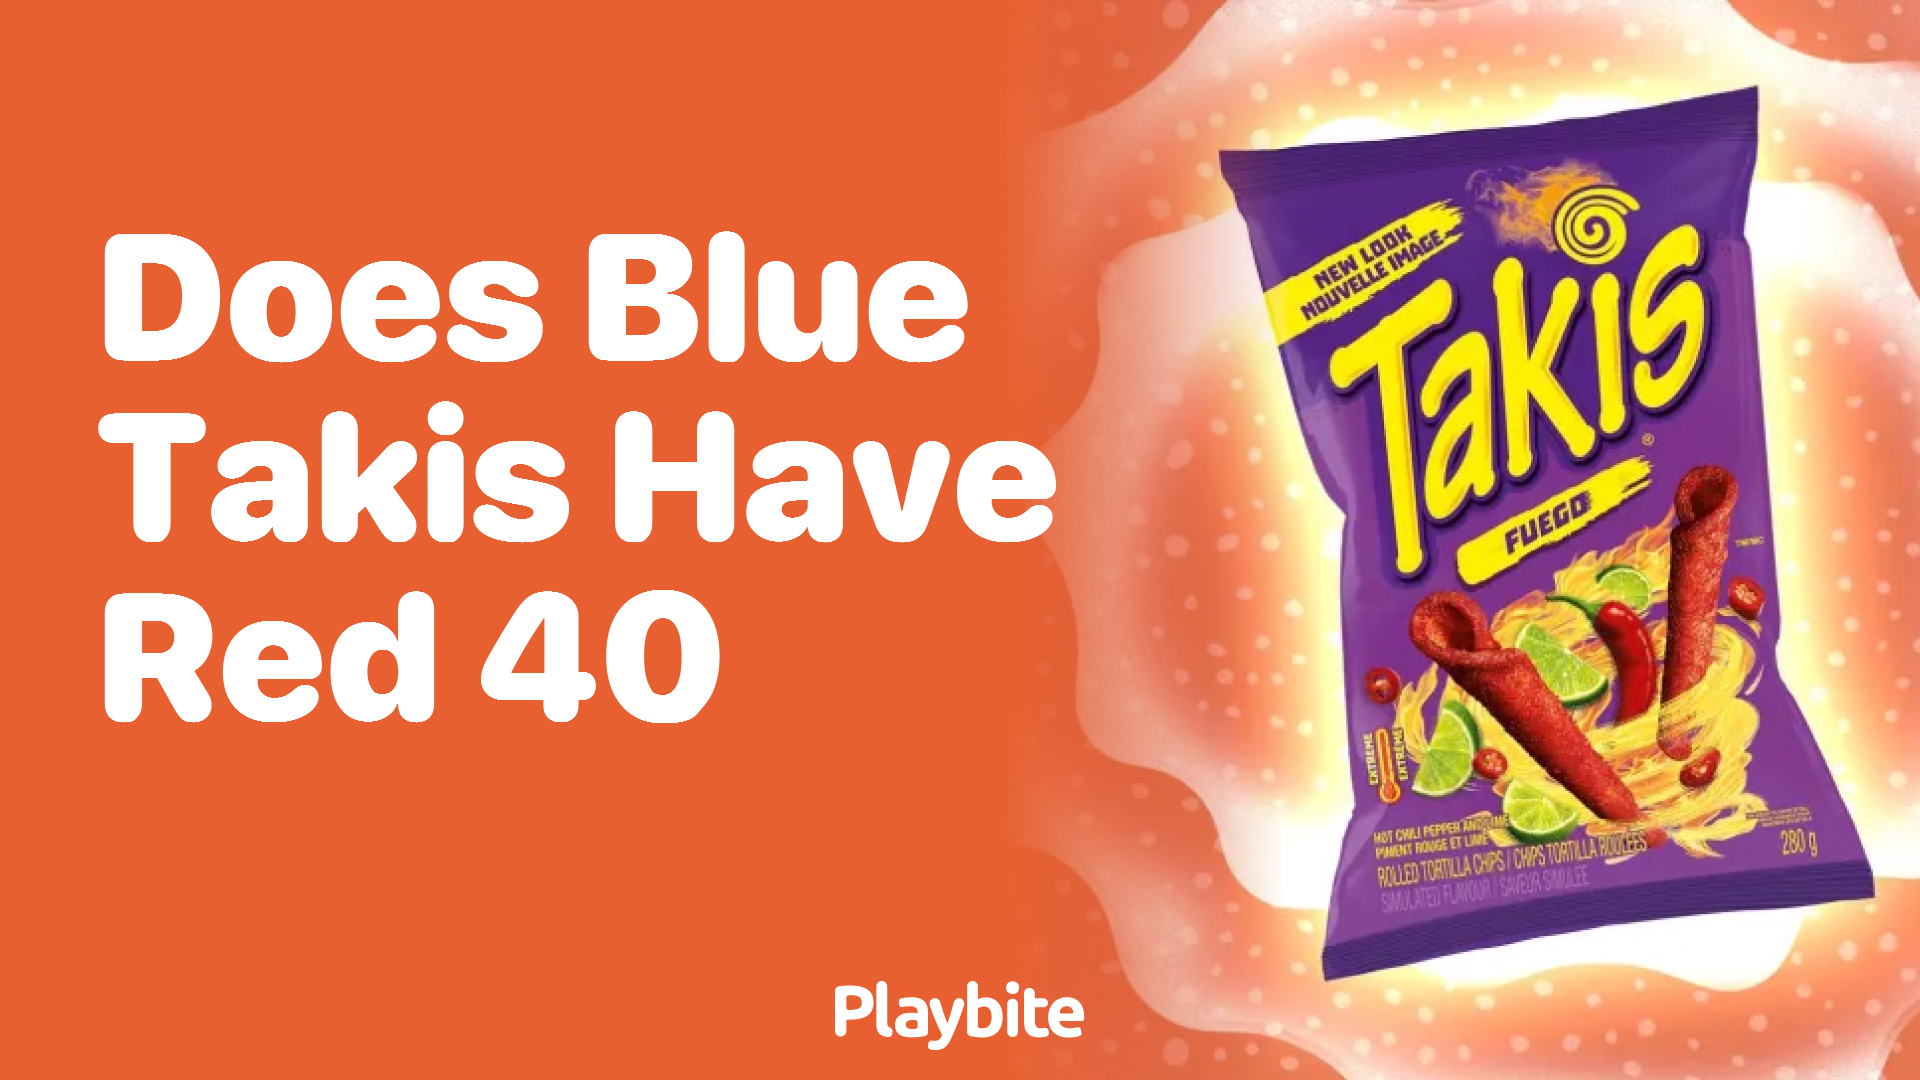 Does Blue Takis Contain Red 40? Get The Scoop Here! - Playbite